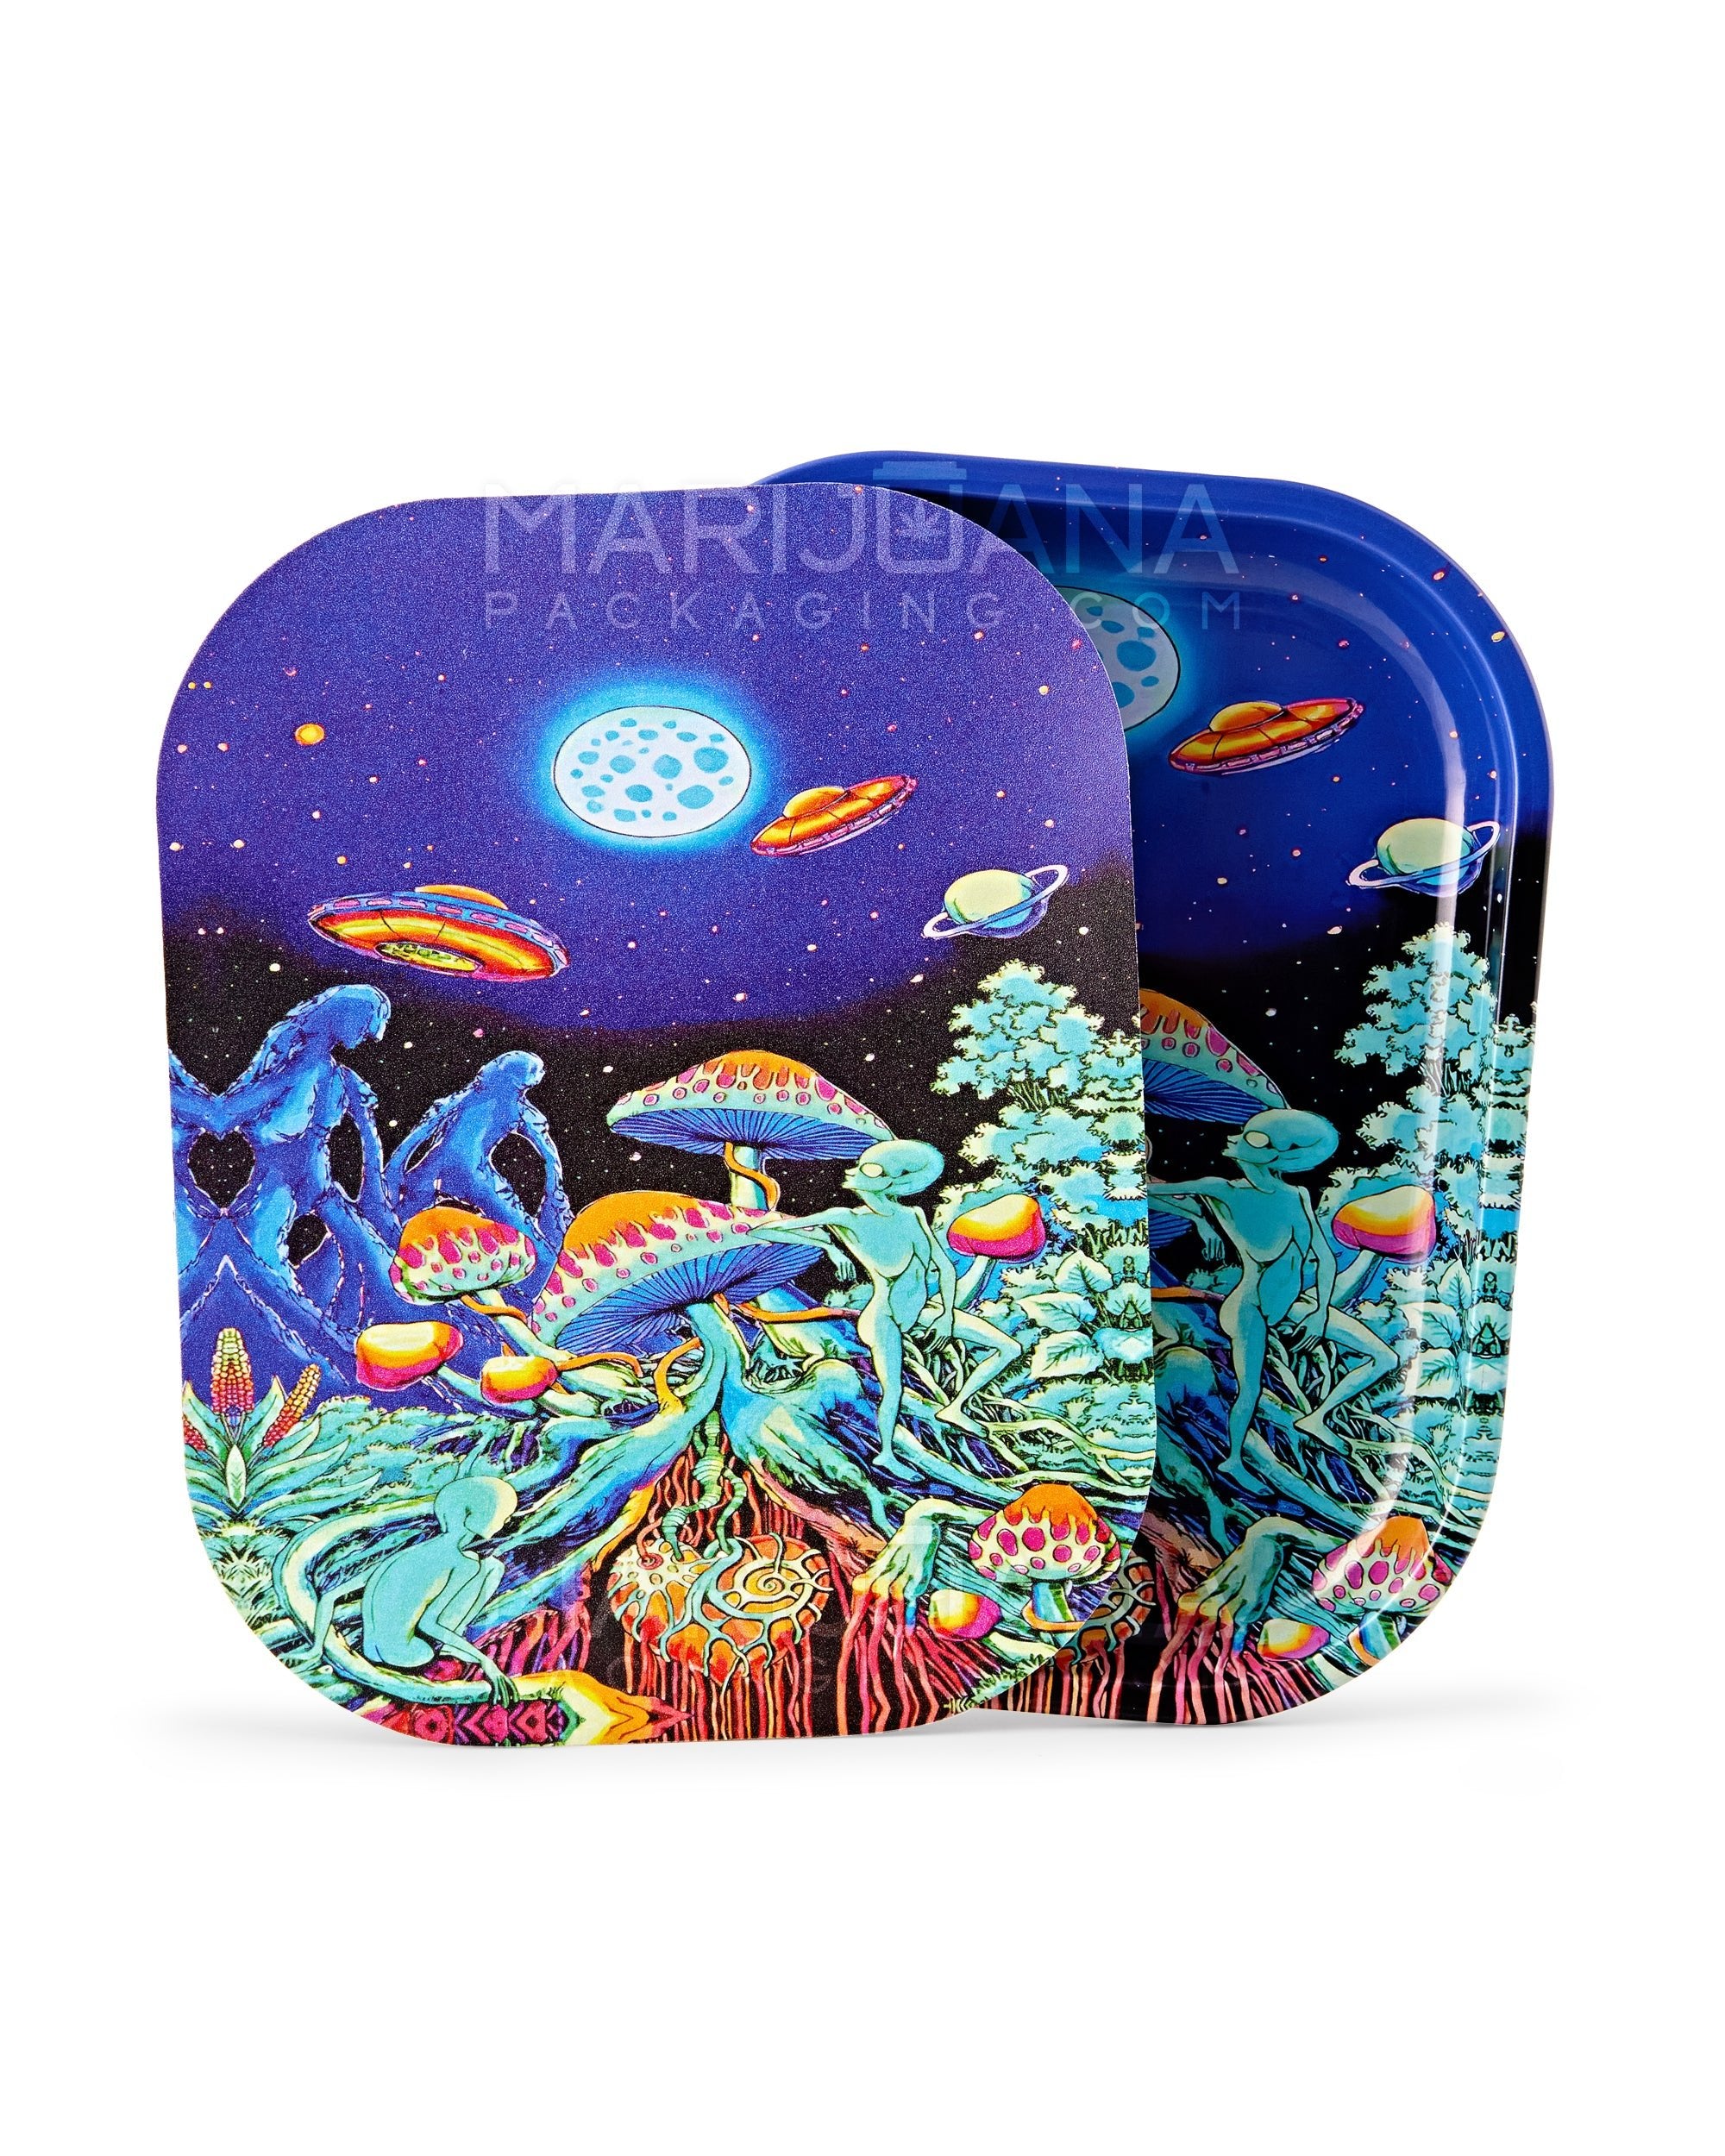 Space Mushroom Rolling Tray w/ Magnetic Cover | 7in x 5.5in - Mini - Metal - 1